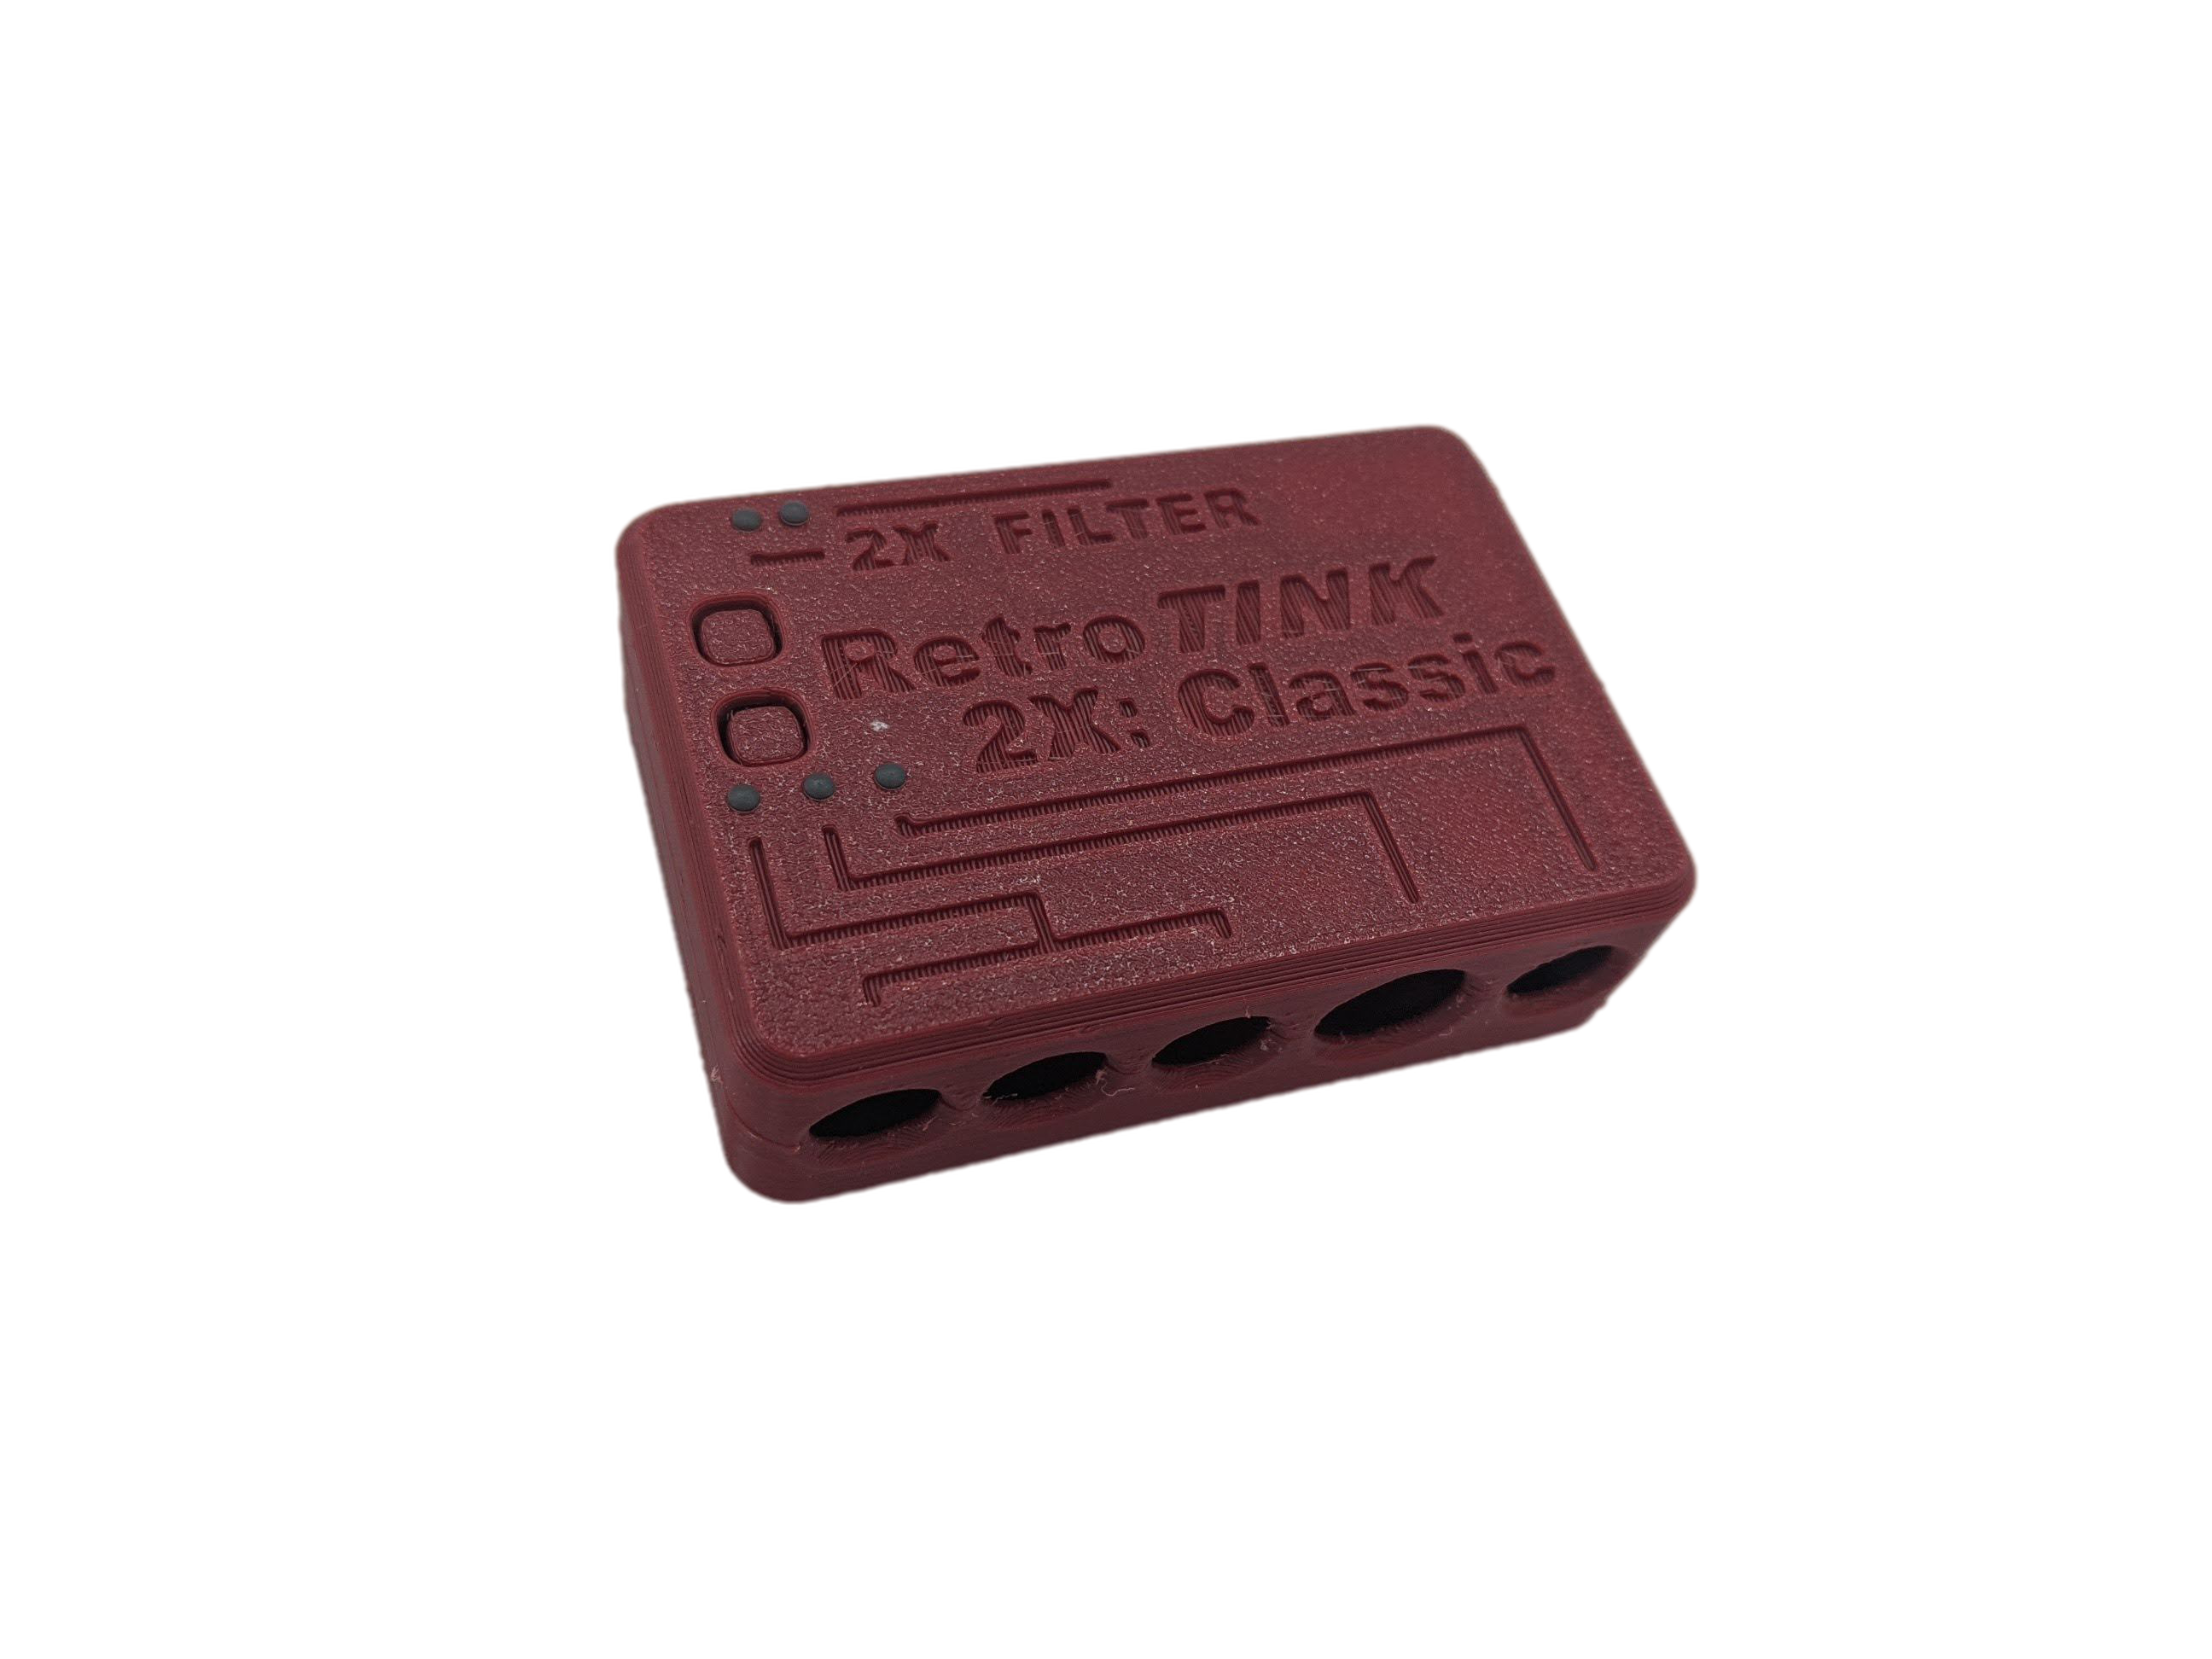 RetroTINK 2X Classic Snap Fit Case